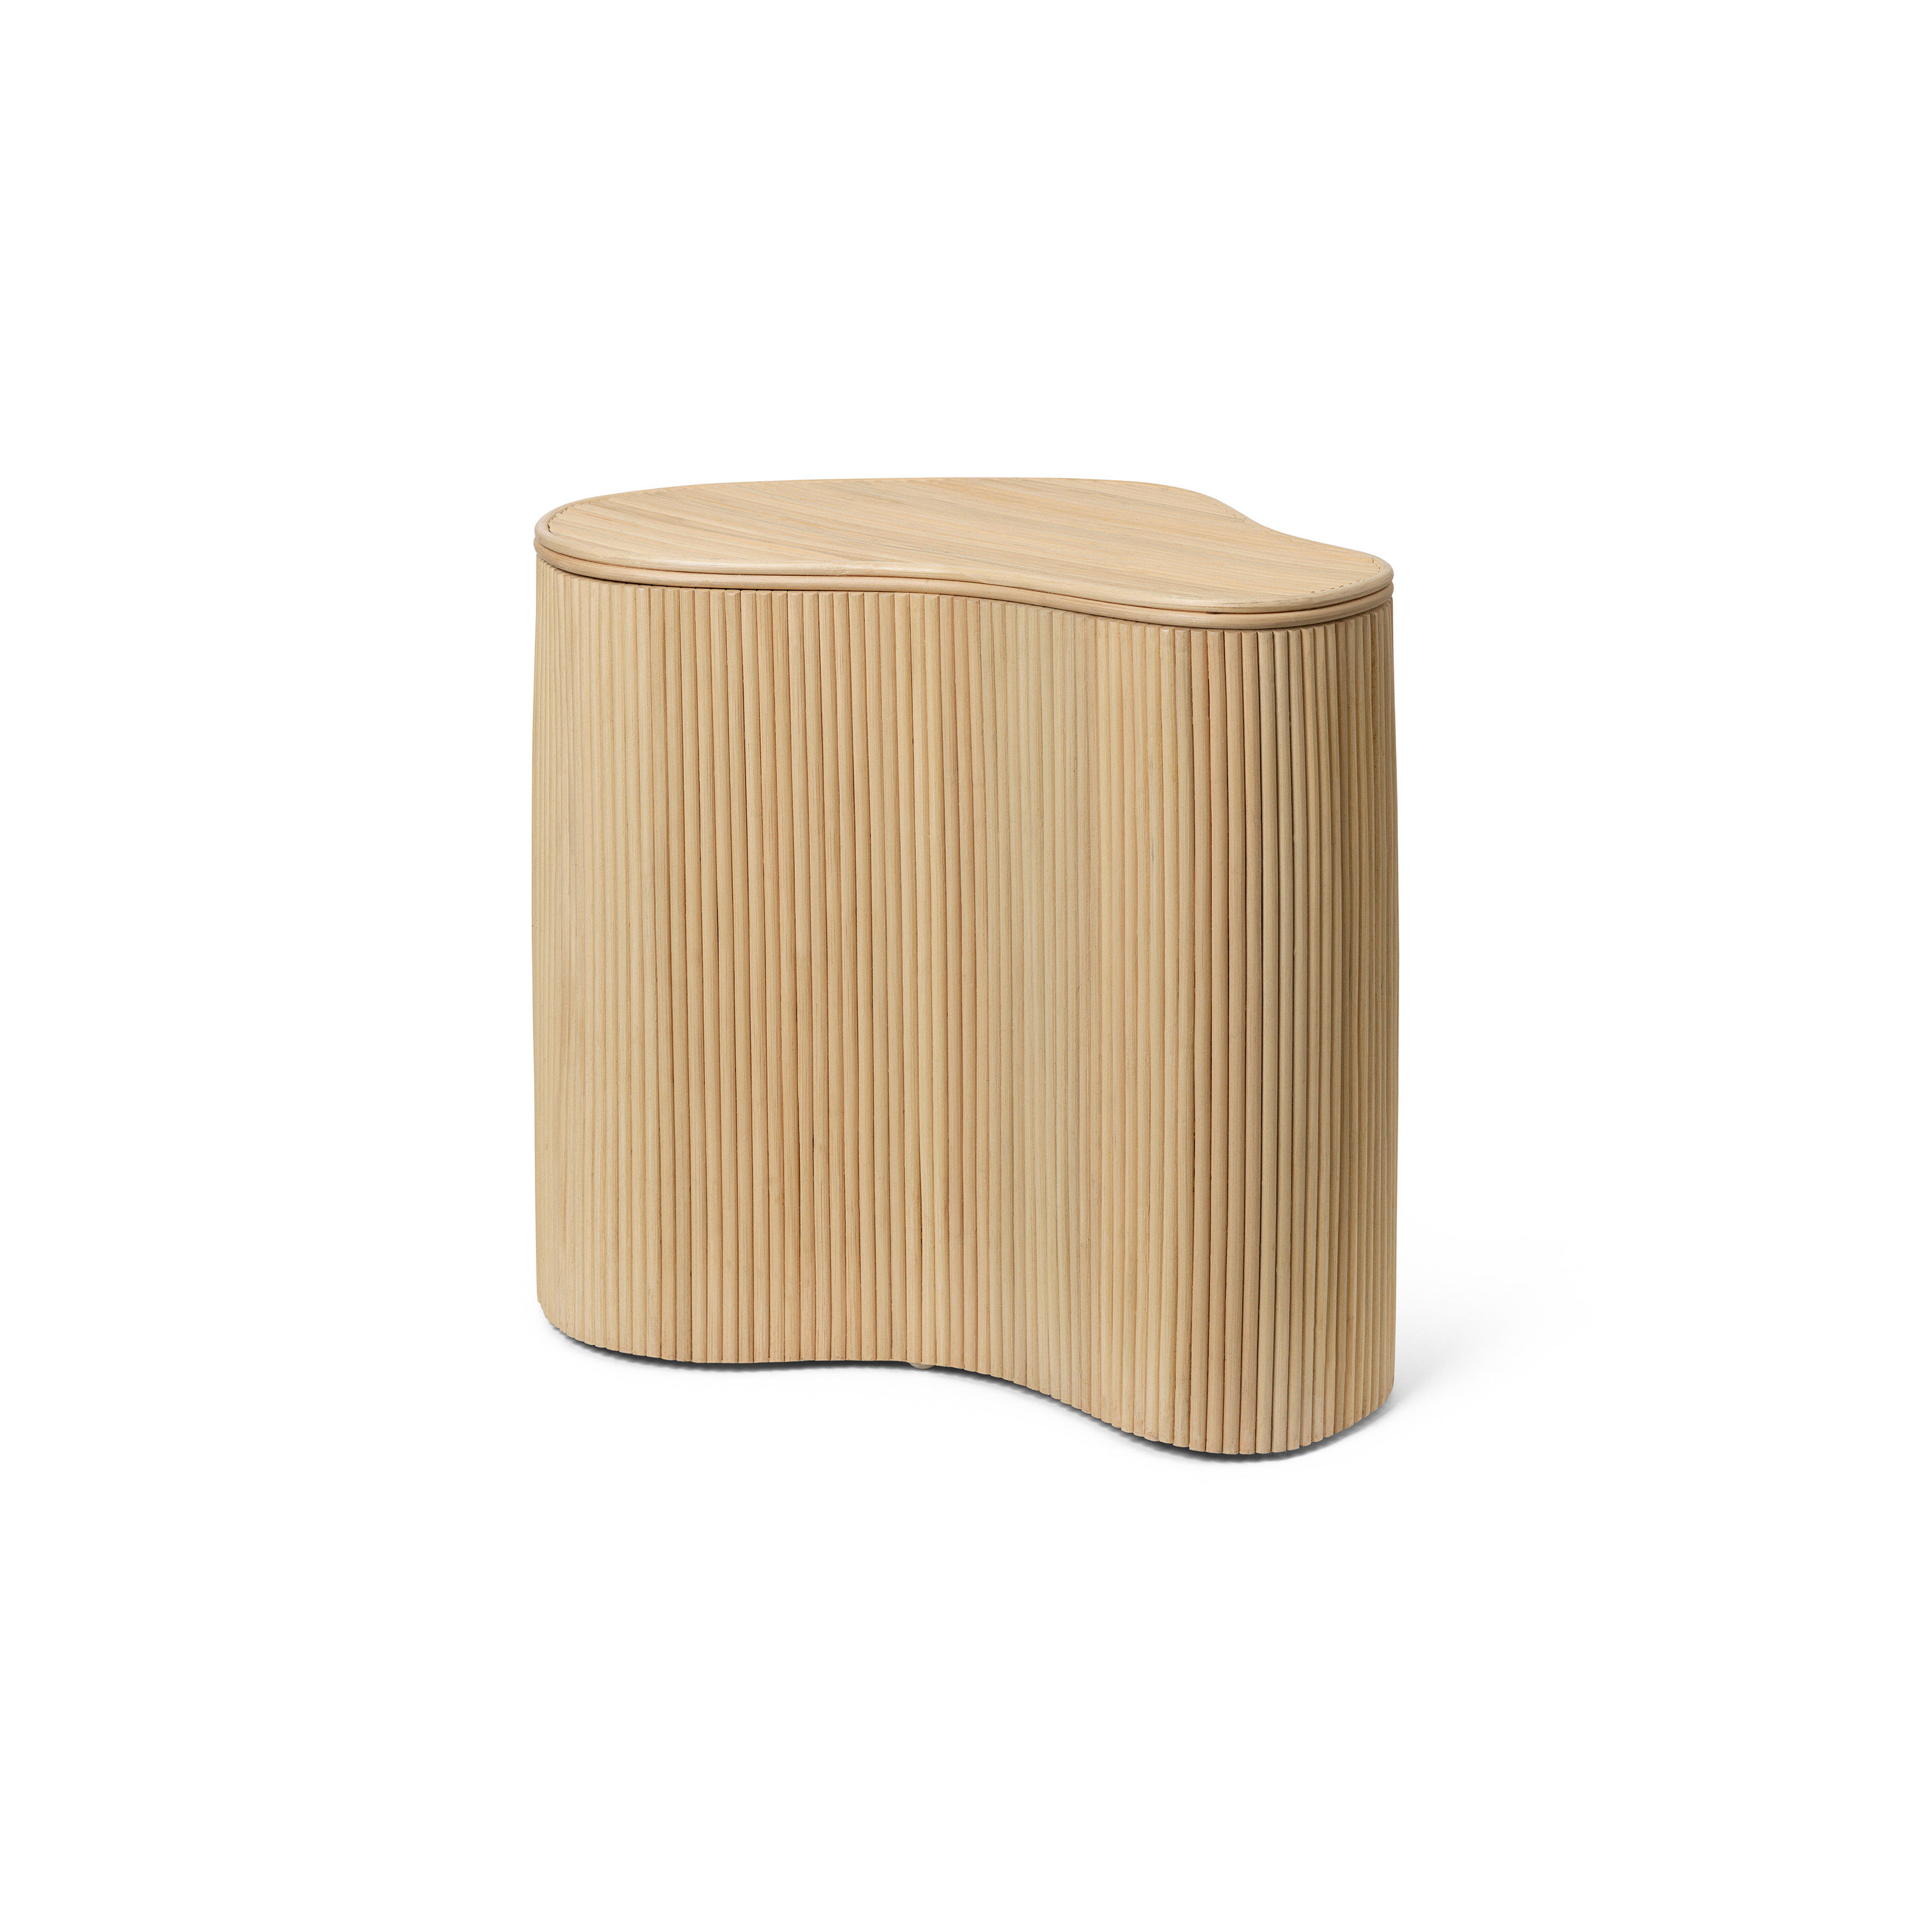 Mobilier - Tables basses - Table d'appoint Isola / Coffre - Rotin / 50 x 35 cm x H 46 cm - Ferm Living - Rotin naturel - Contreplaqué, MDF, Rotin